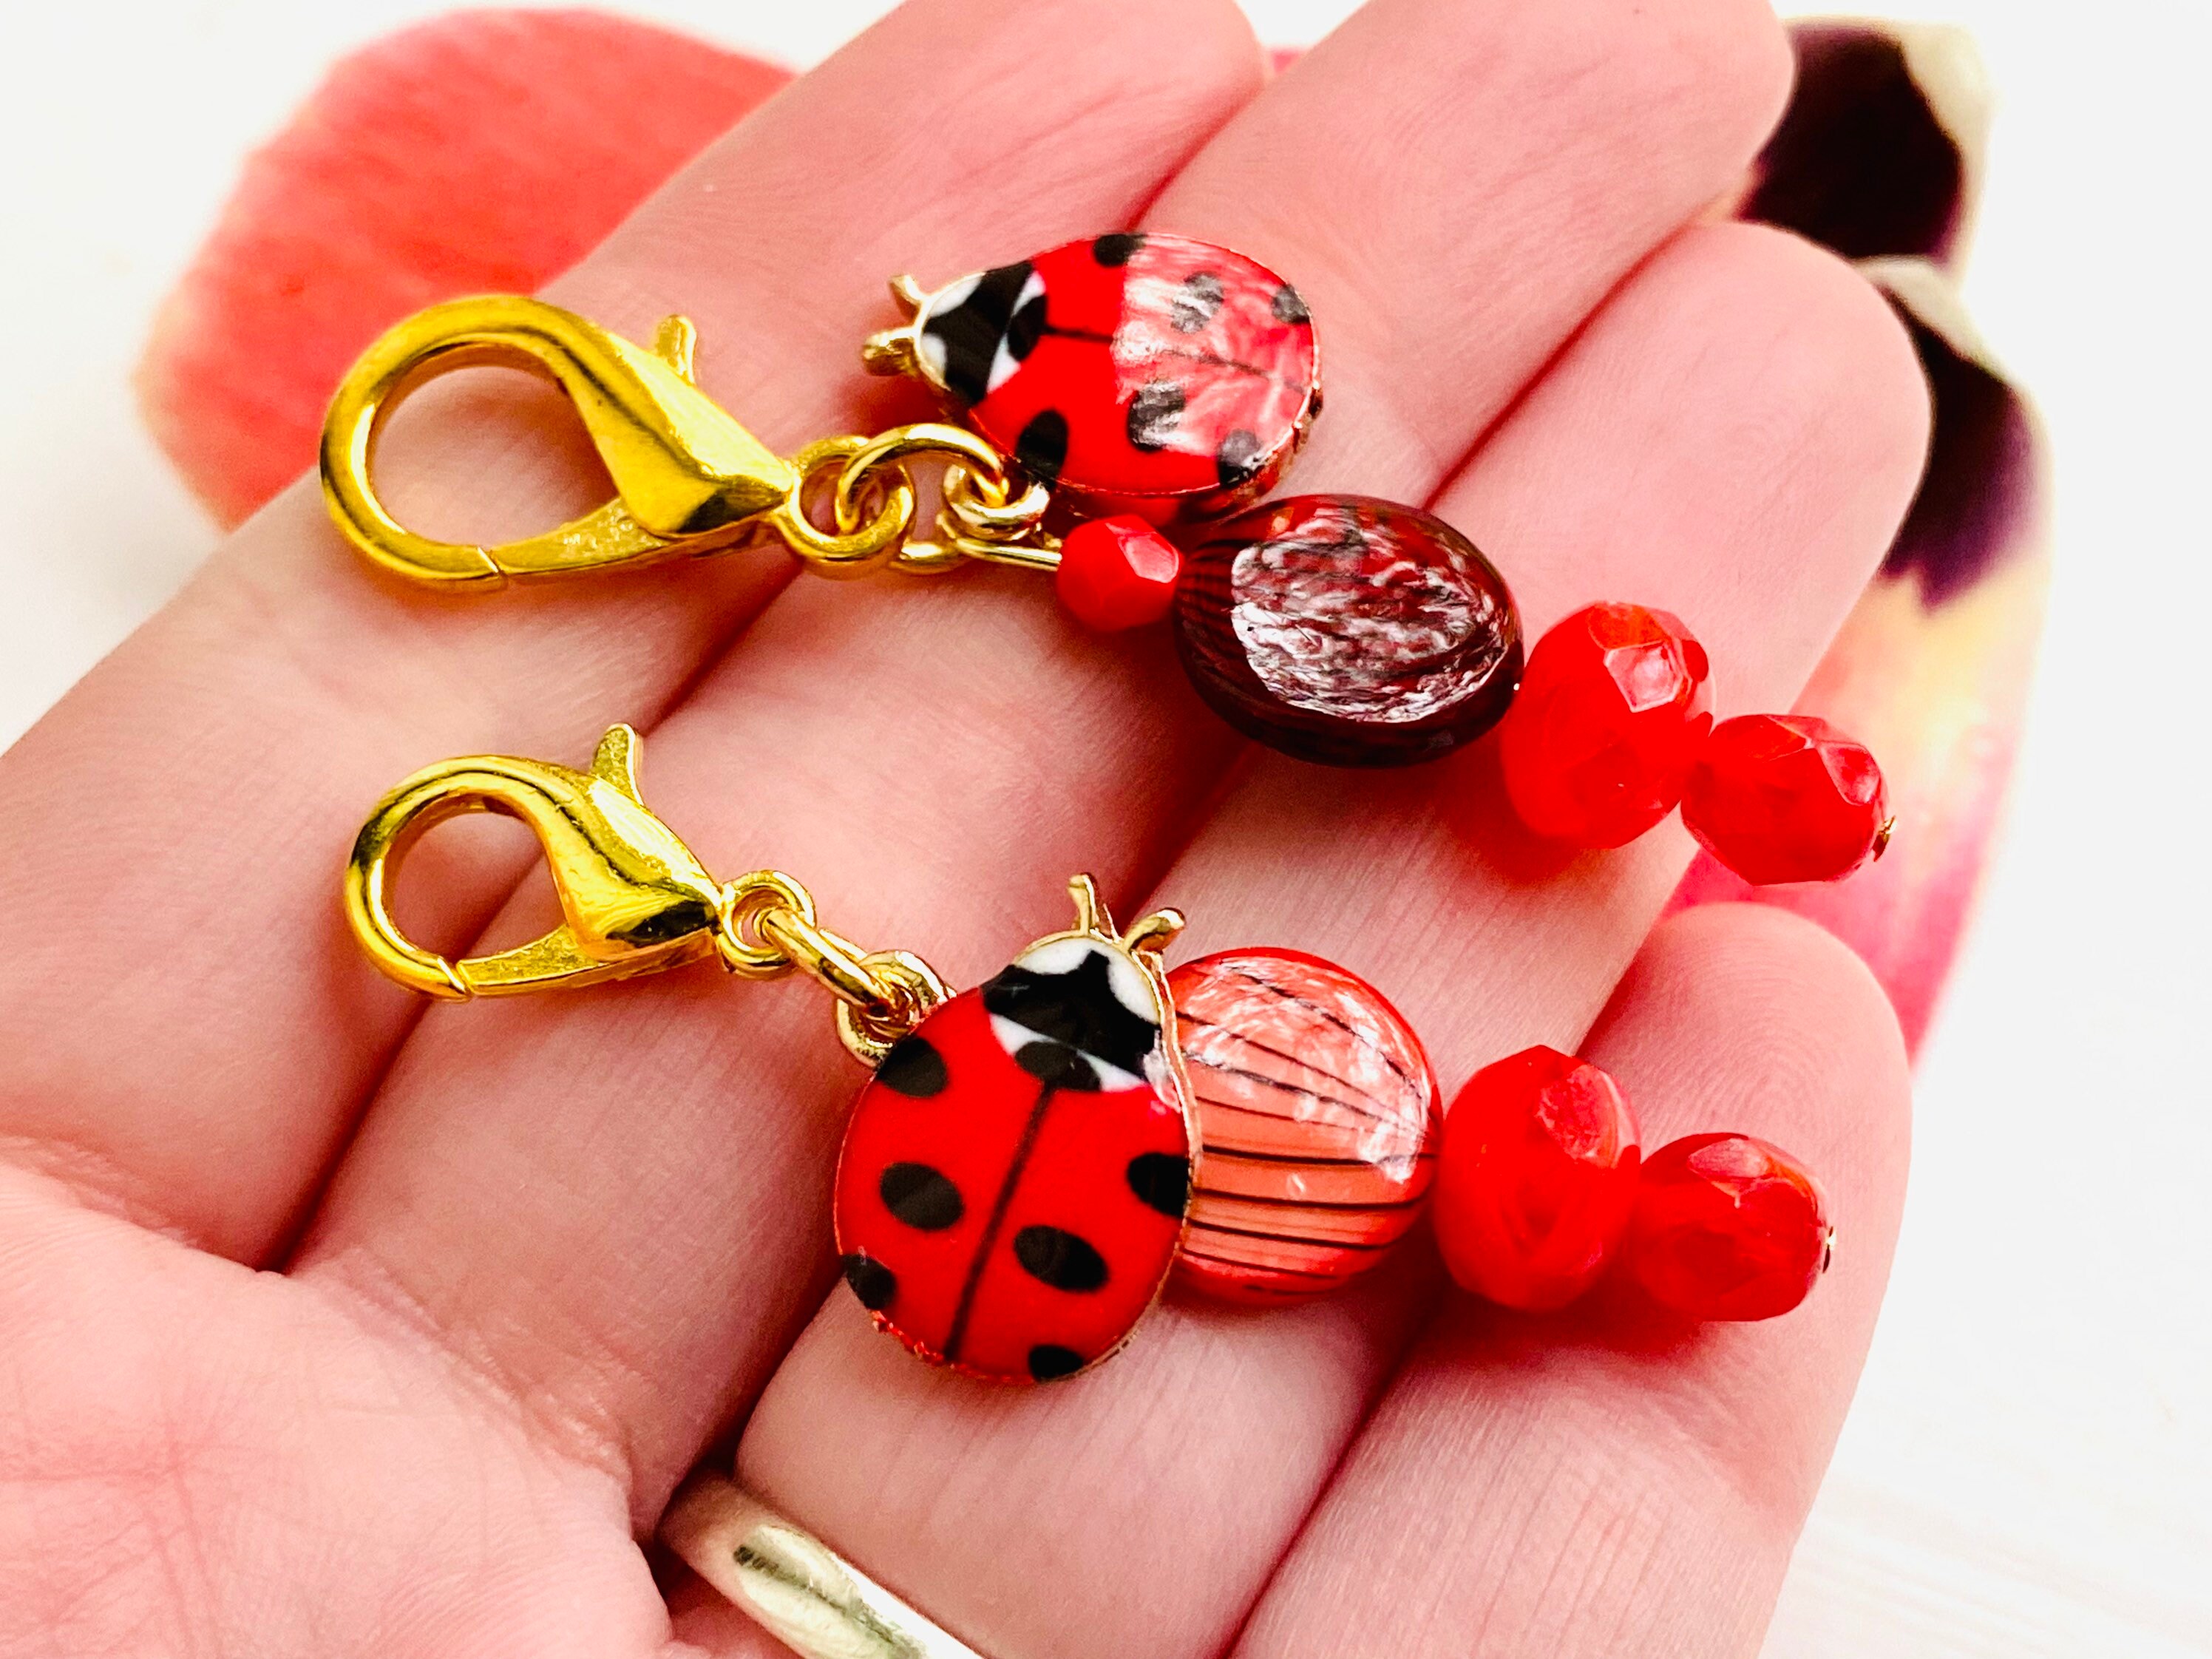 Synthetic Leather Zipper Pull - Lady Bug